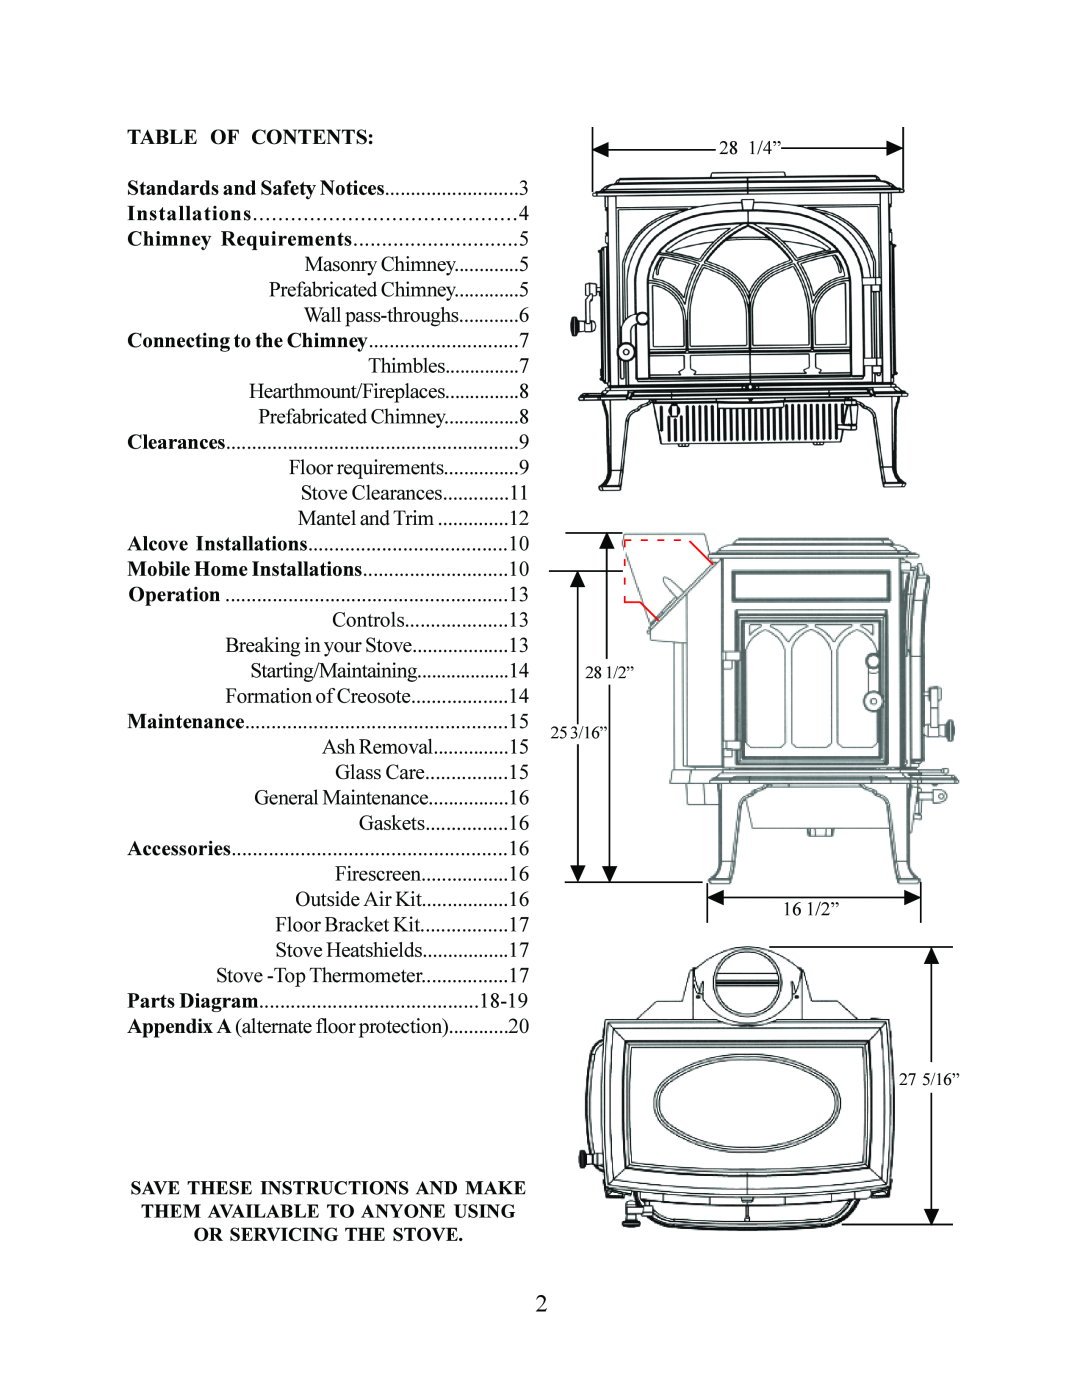 Jotul F 500 operating instructions Table Of Contents 